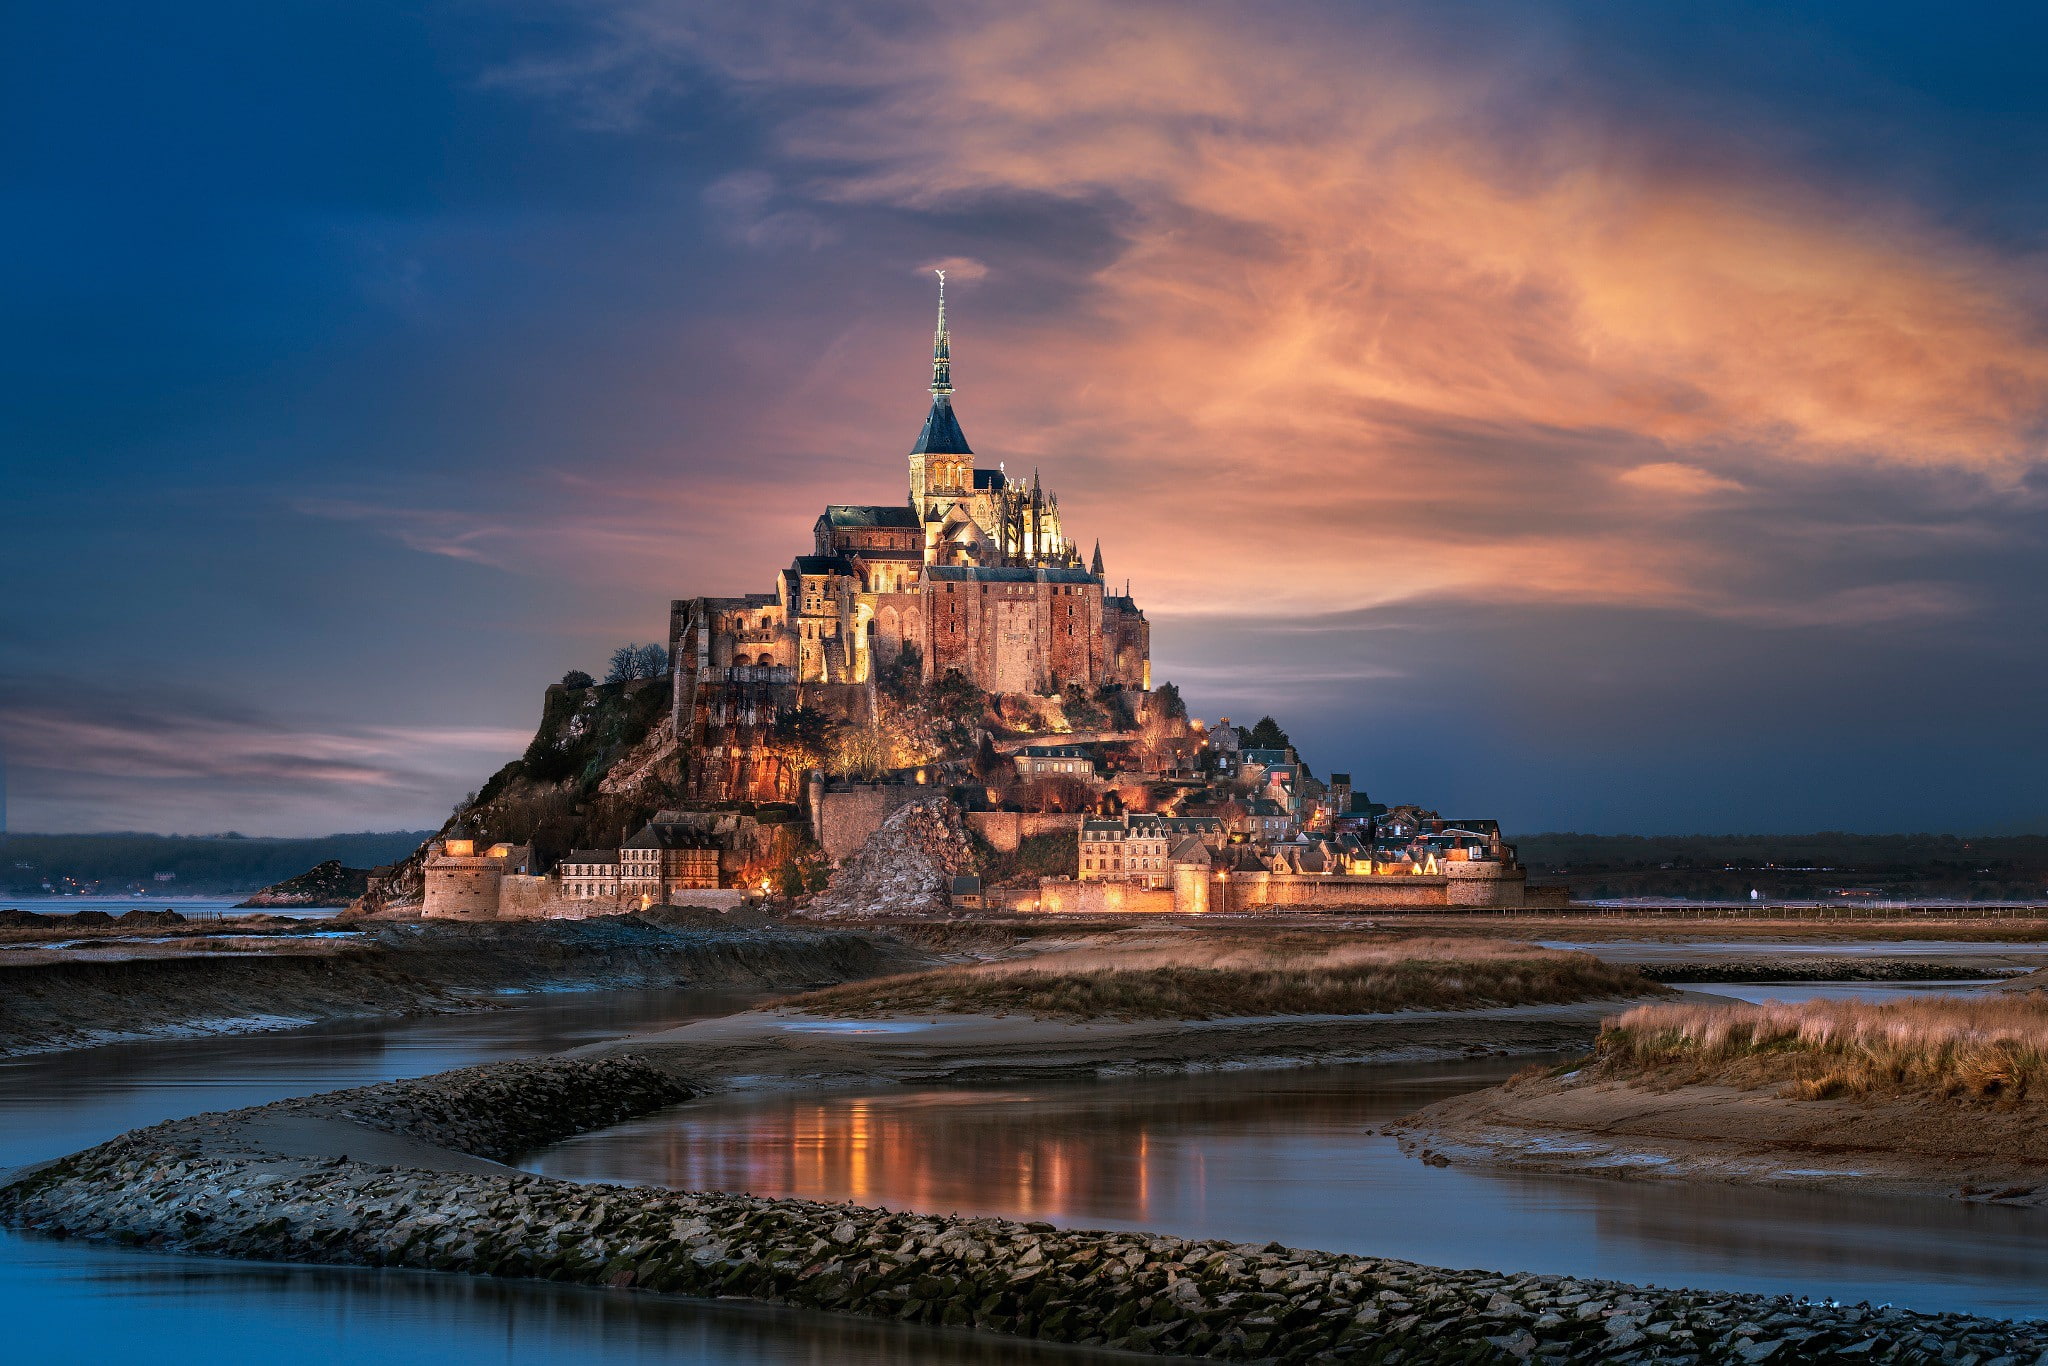 France, Normandy, the city, the island fortress, Mont Saint-Michel